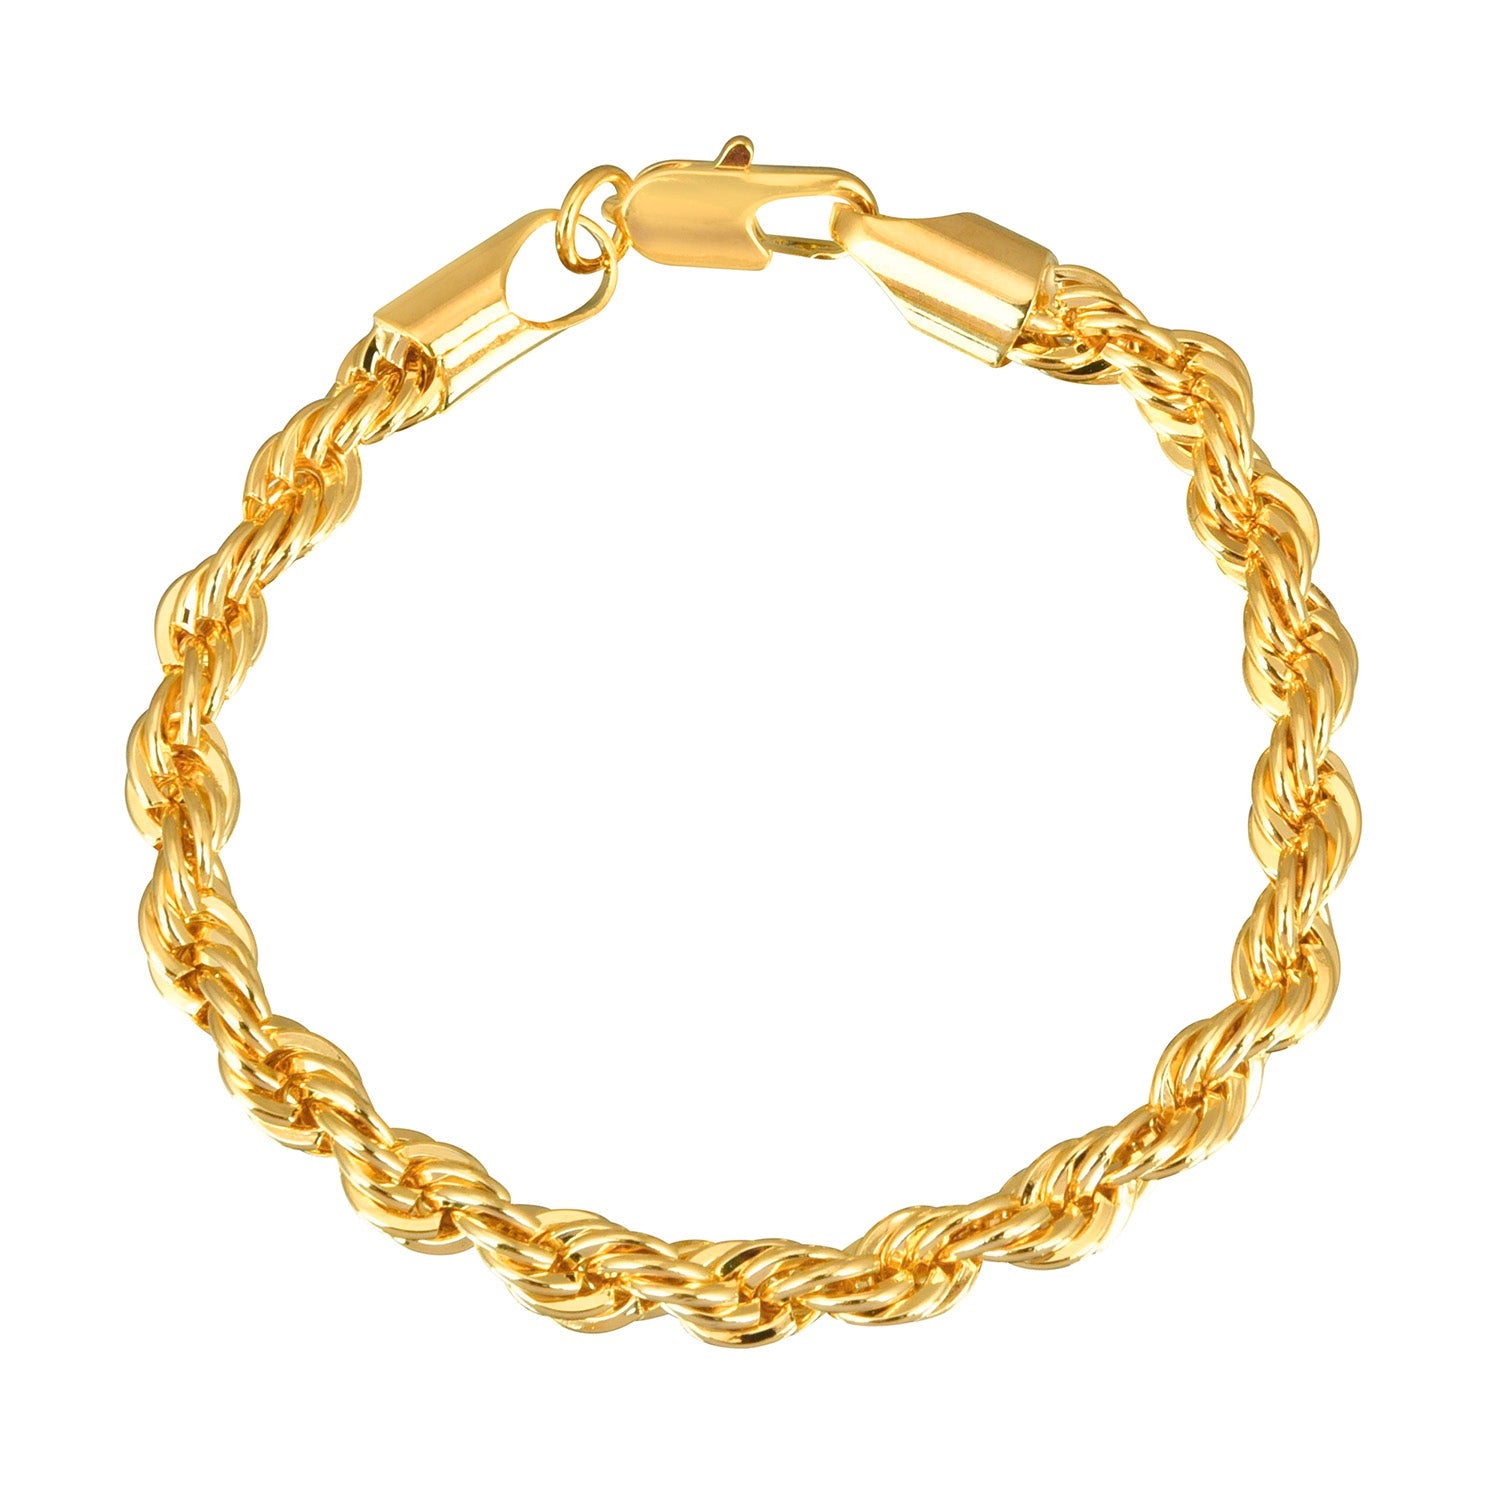 Buy Twisted Rope Bracelet, 18k Gold Plated, Elegant Gold Bracelet, Classy  Bracelet, High Quality Bracelet Online in India - Etsy